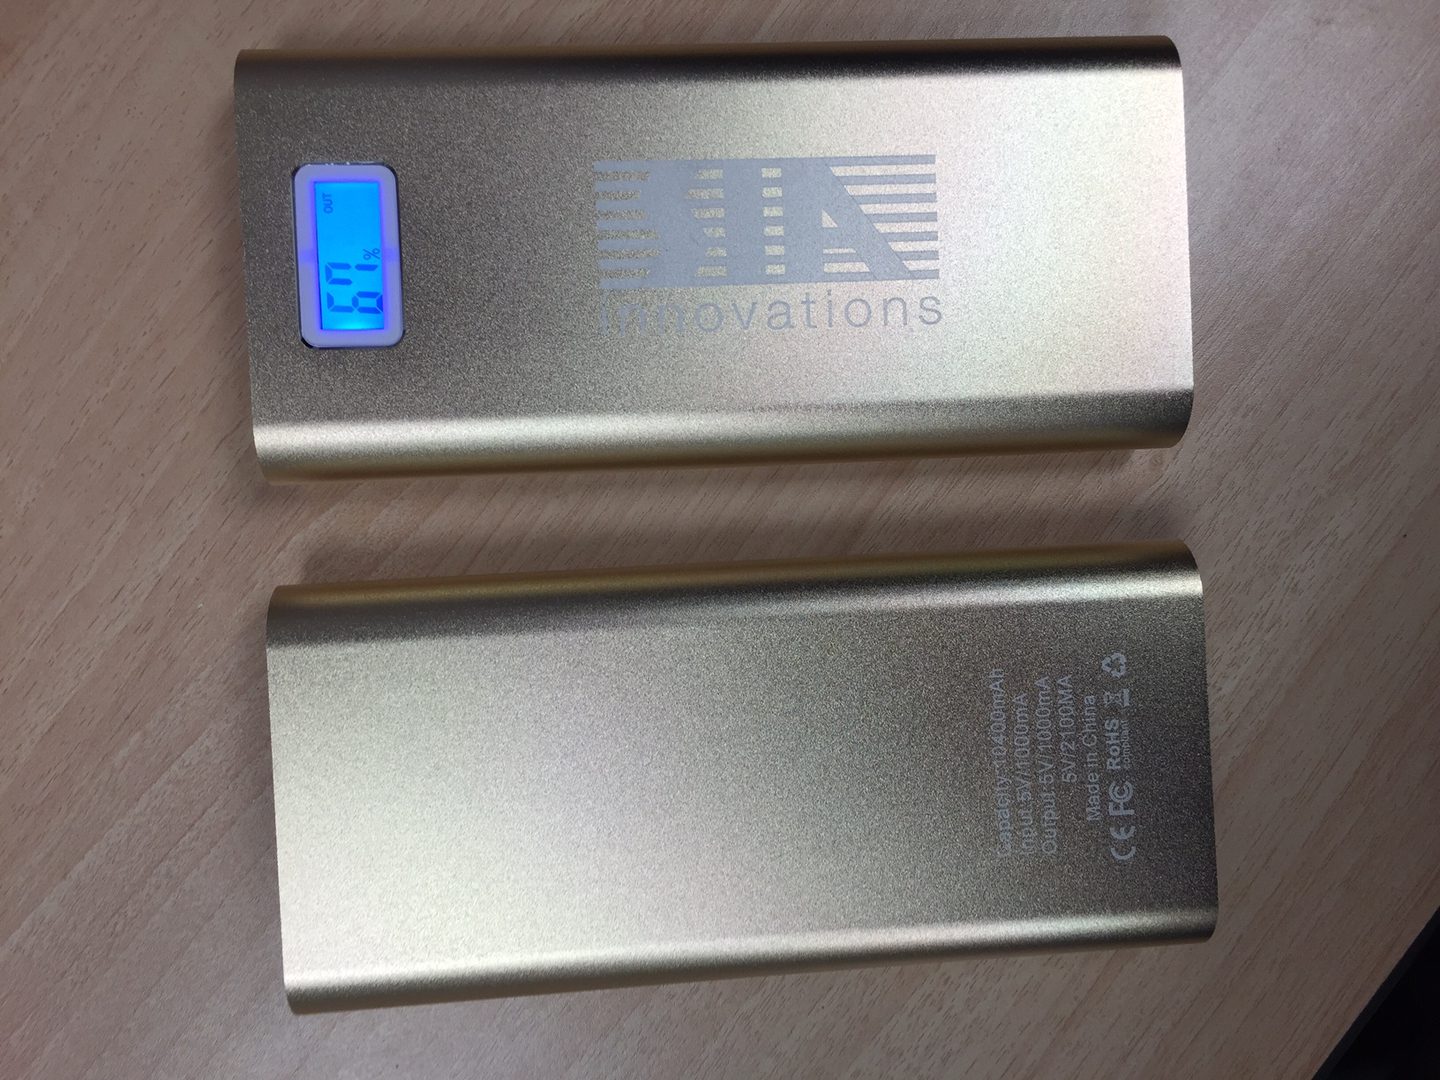 A Silver Color Power Bank With a Blue Display